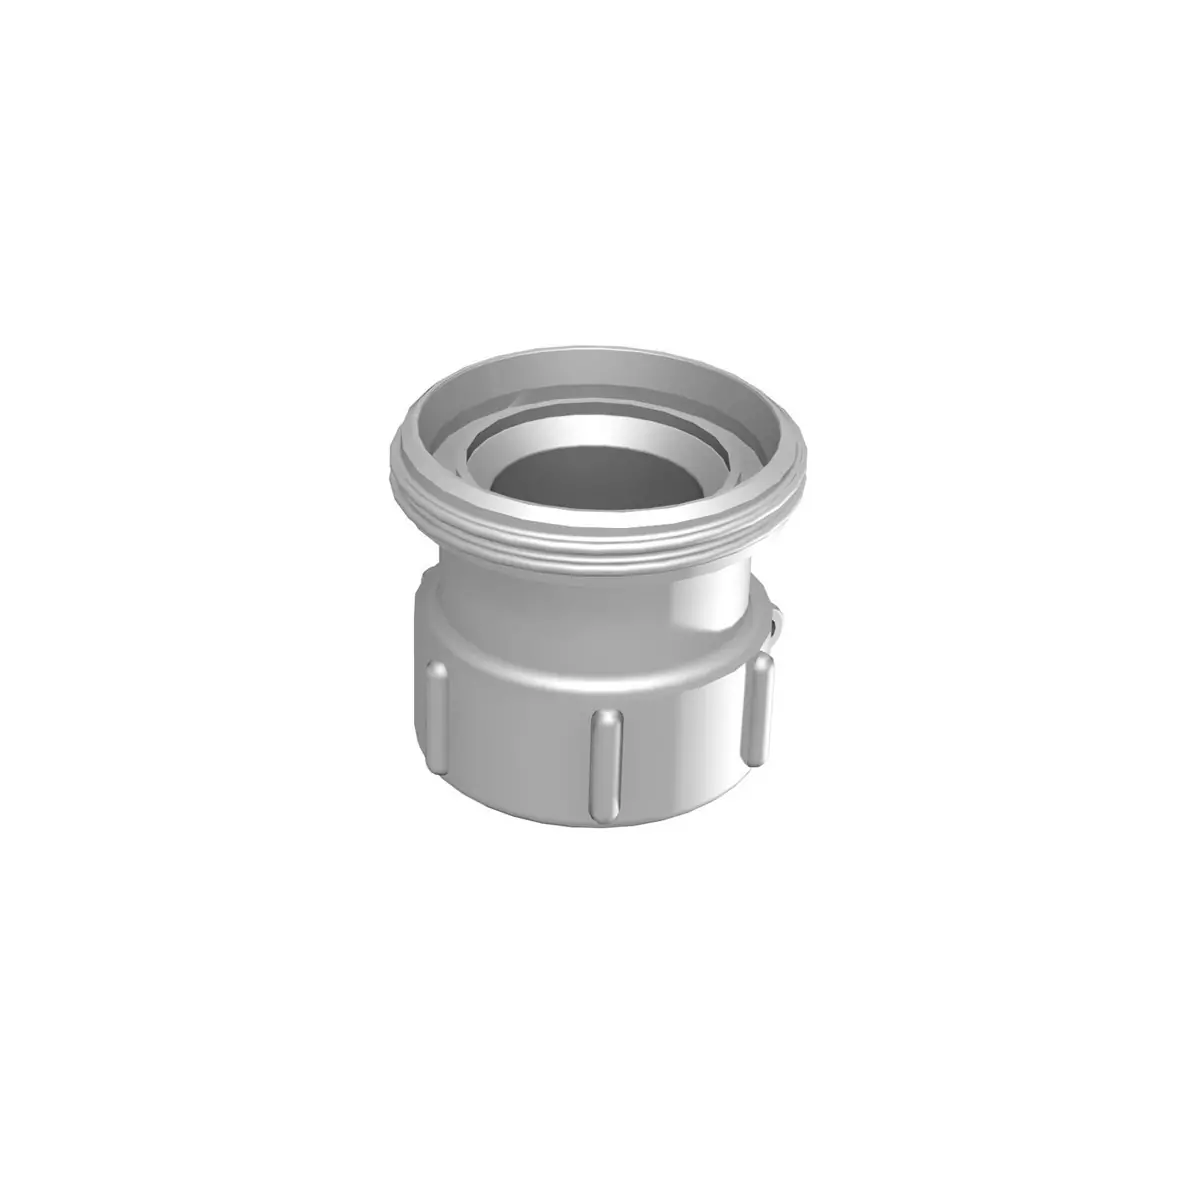 RD78 female connector - 2 inch male camlock